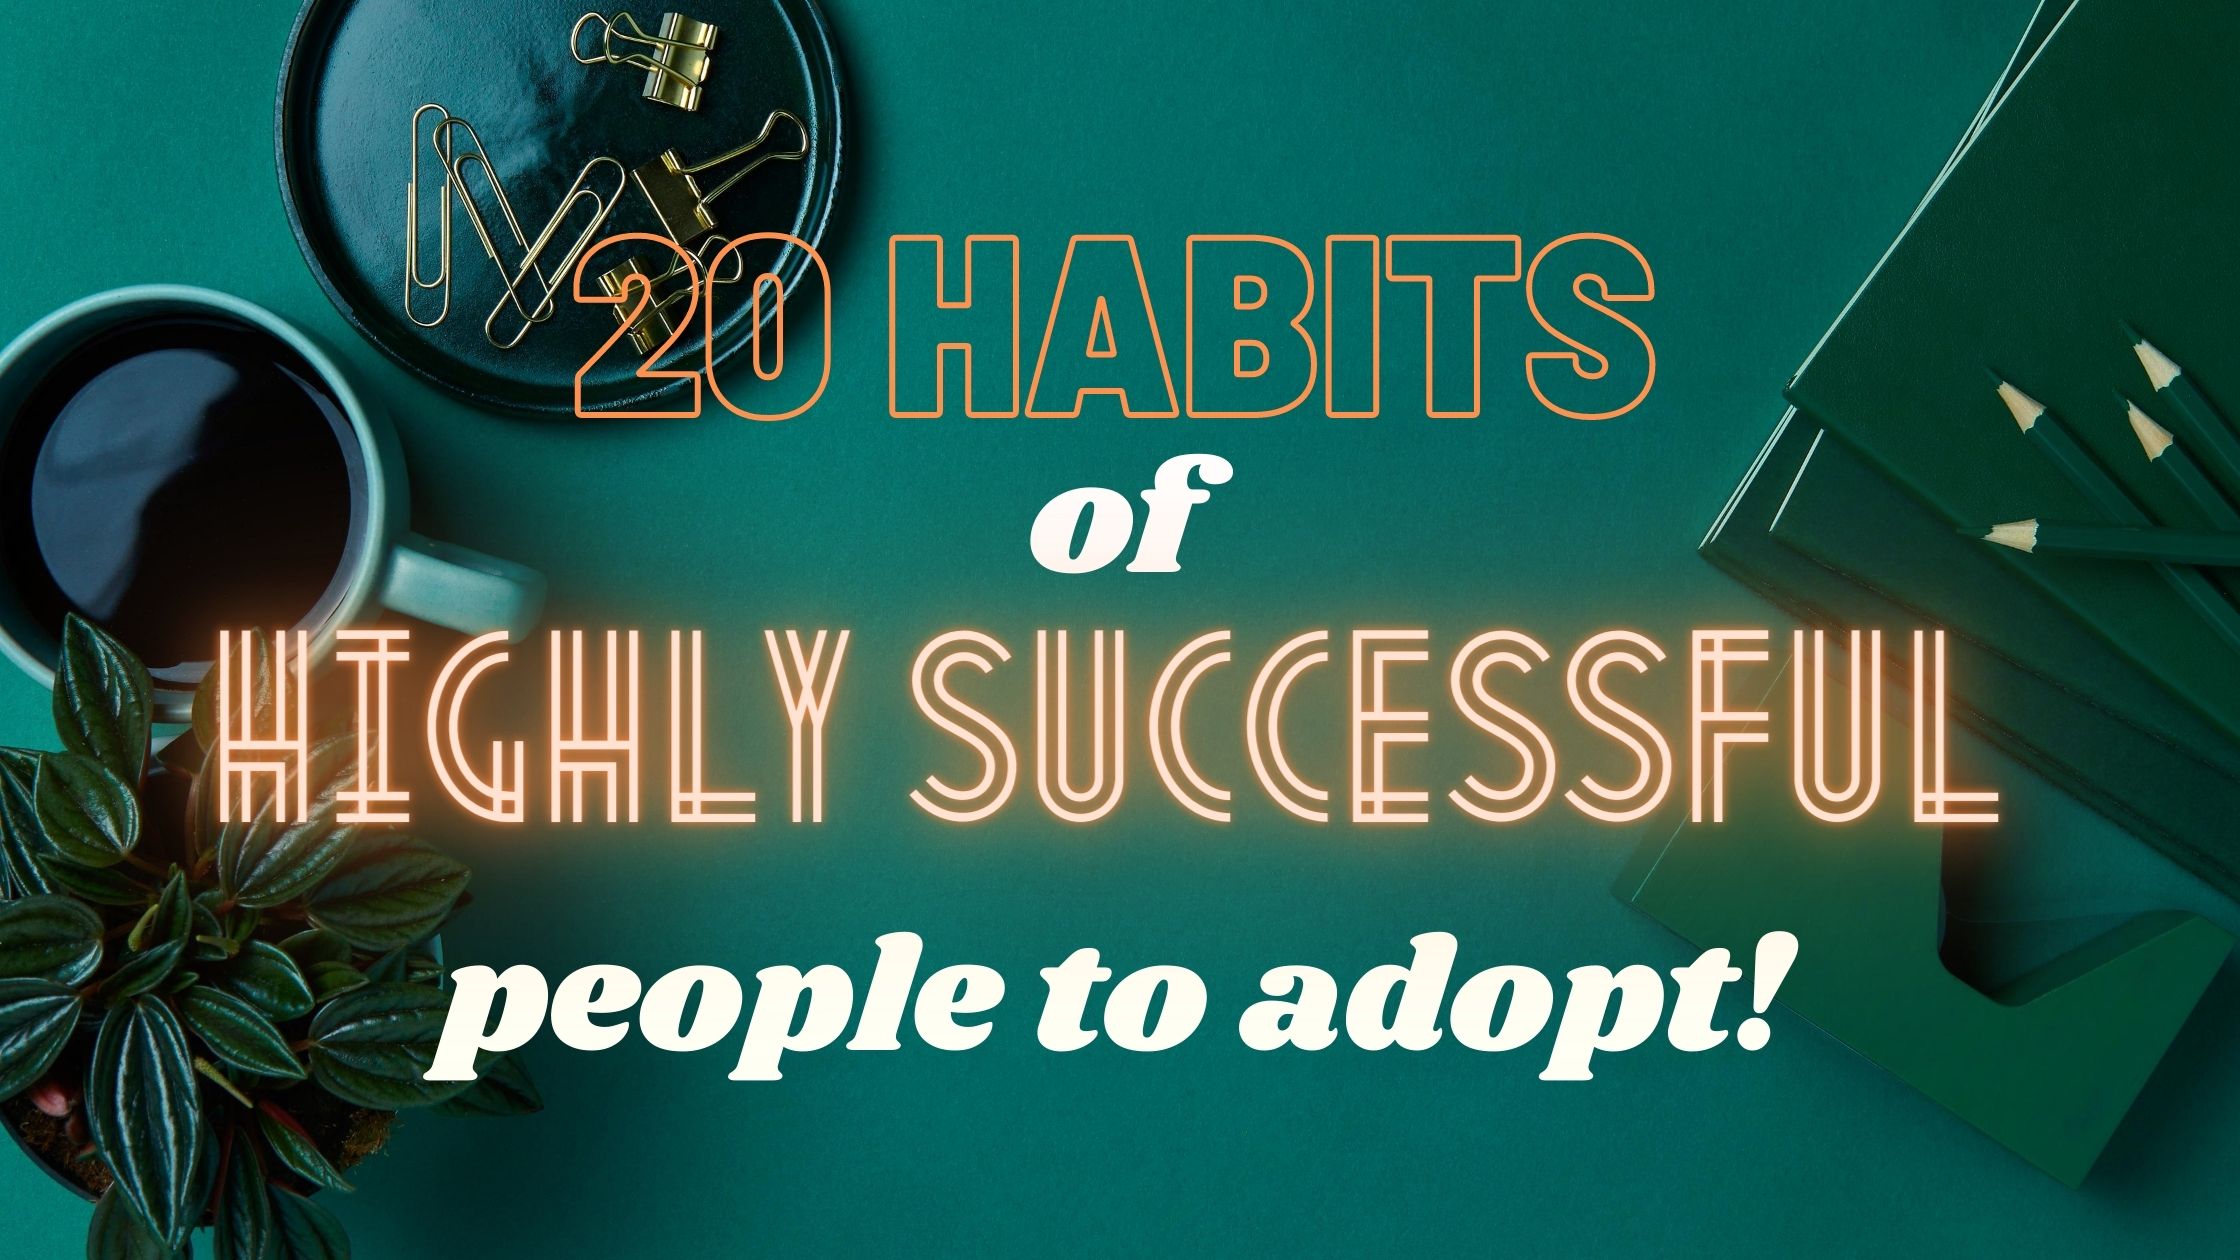 20 Habits of highly successful people to adopt!